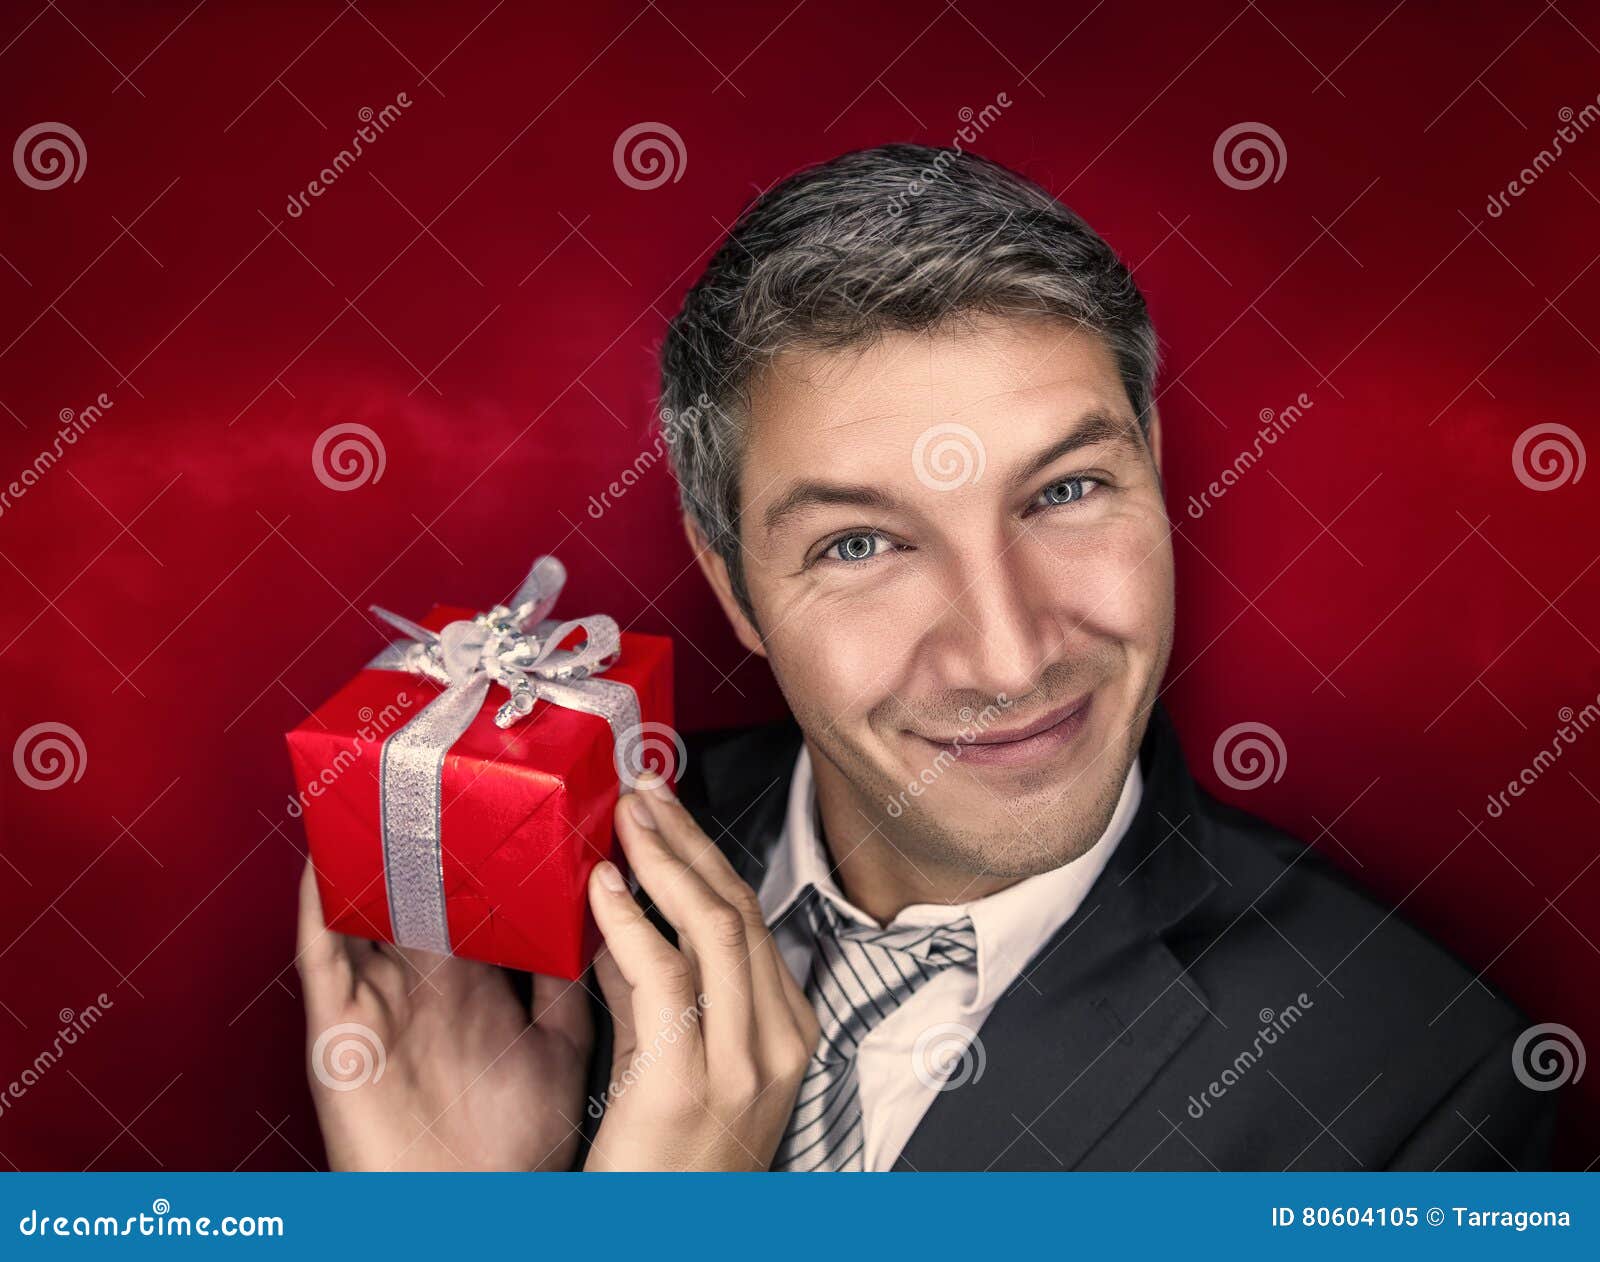 Present man stock image. Image of person, holiday, hold - 80604105